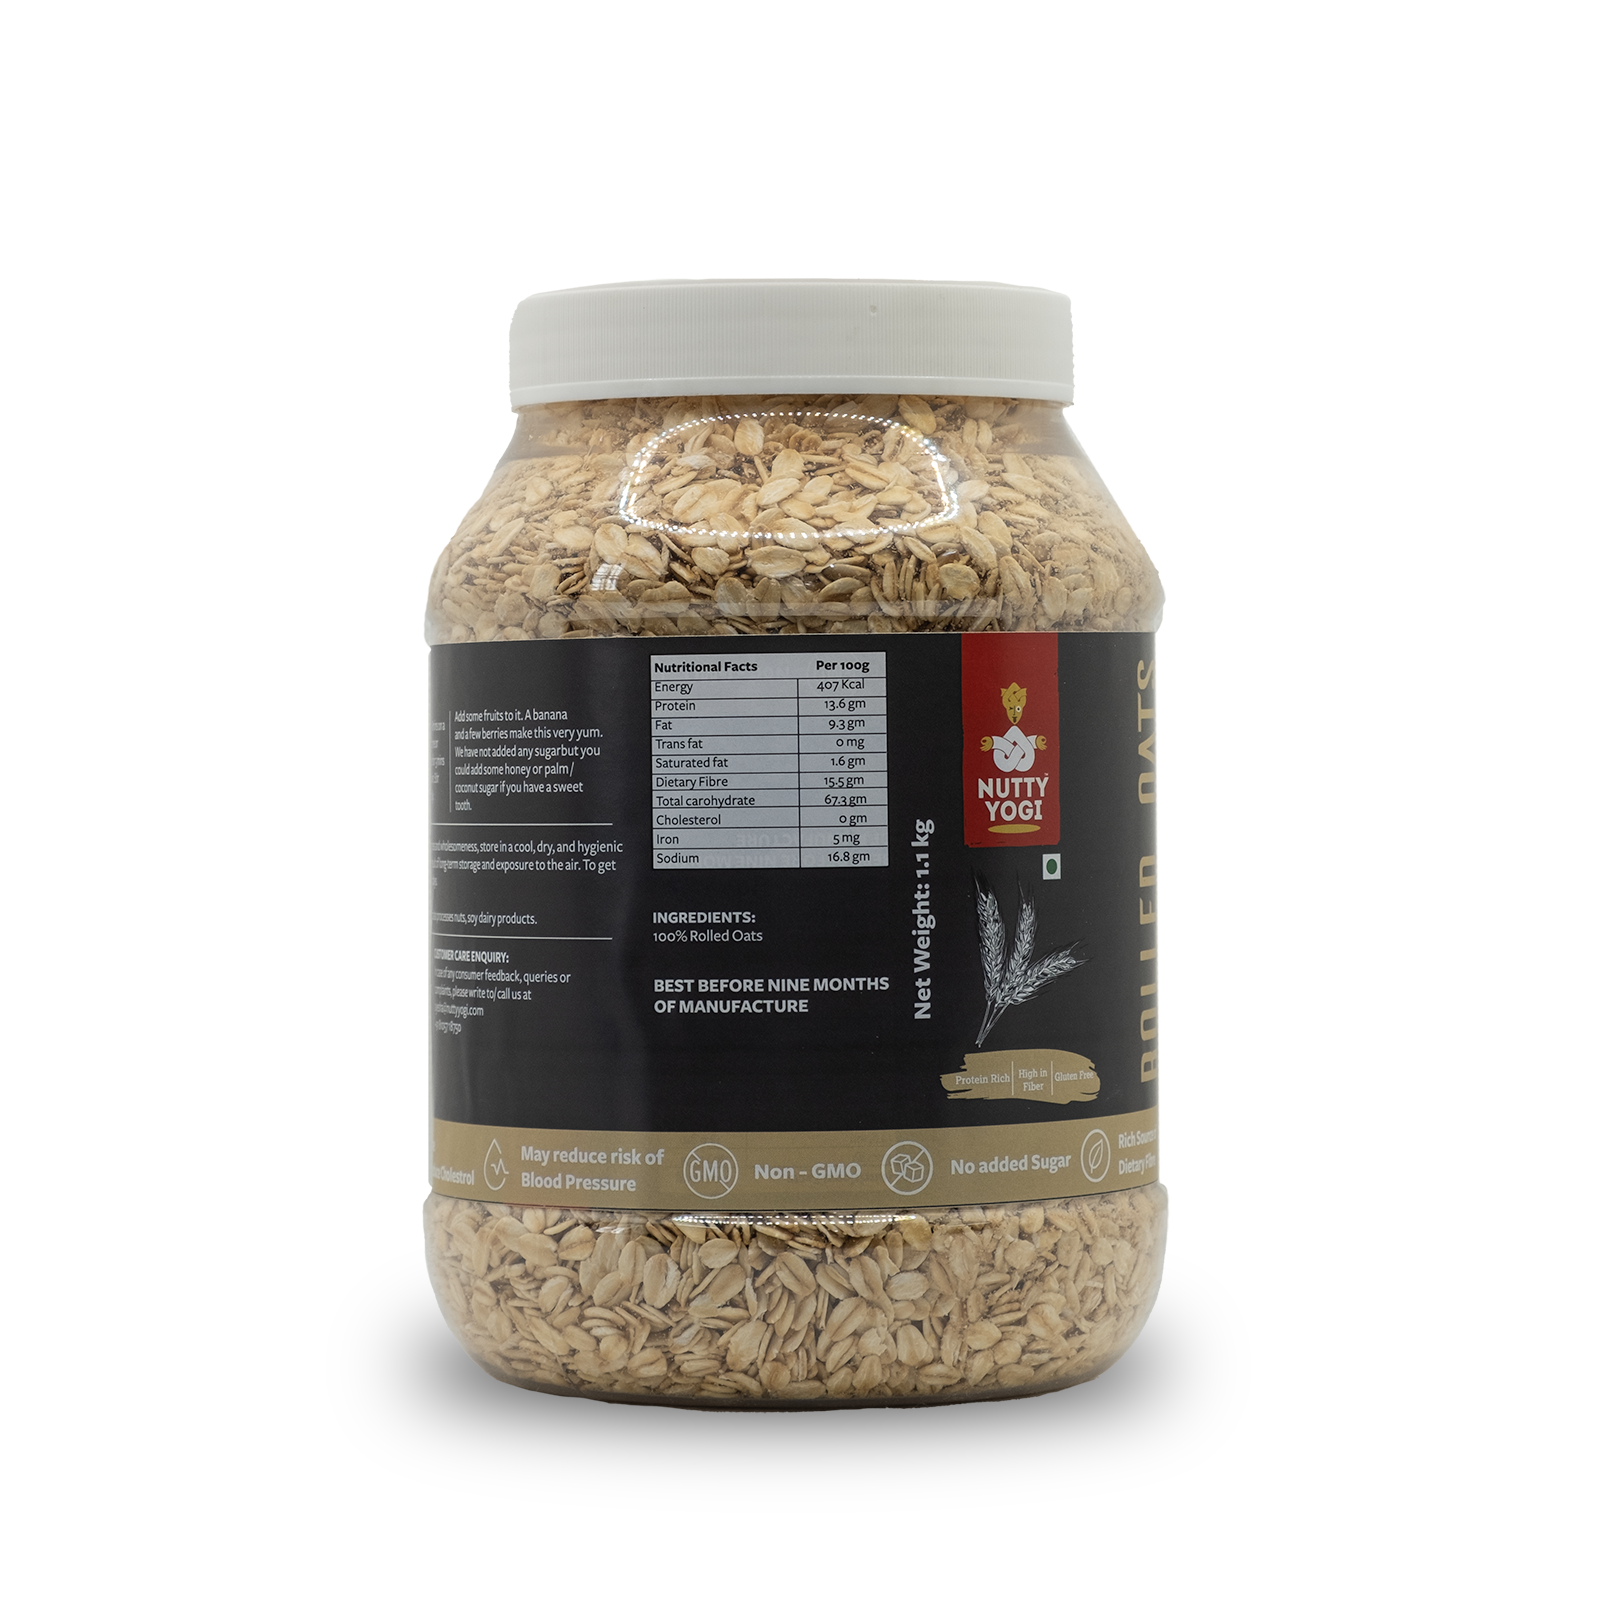 Yogabar Rolled Oats 1.2 Kg Premium Golden Rolled Oats, Gluten Free Oats  With High Fibre, Whole Grain, Non Gmo Healthy Food With No Added Sugar Diet